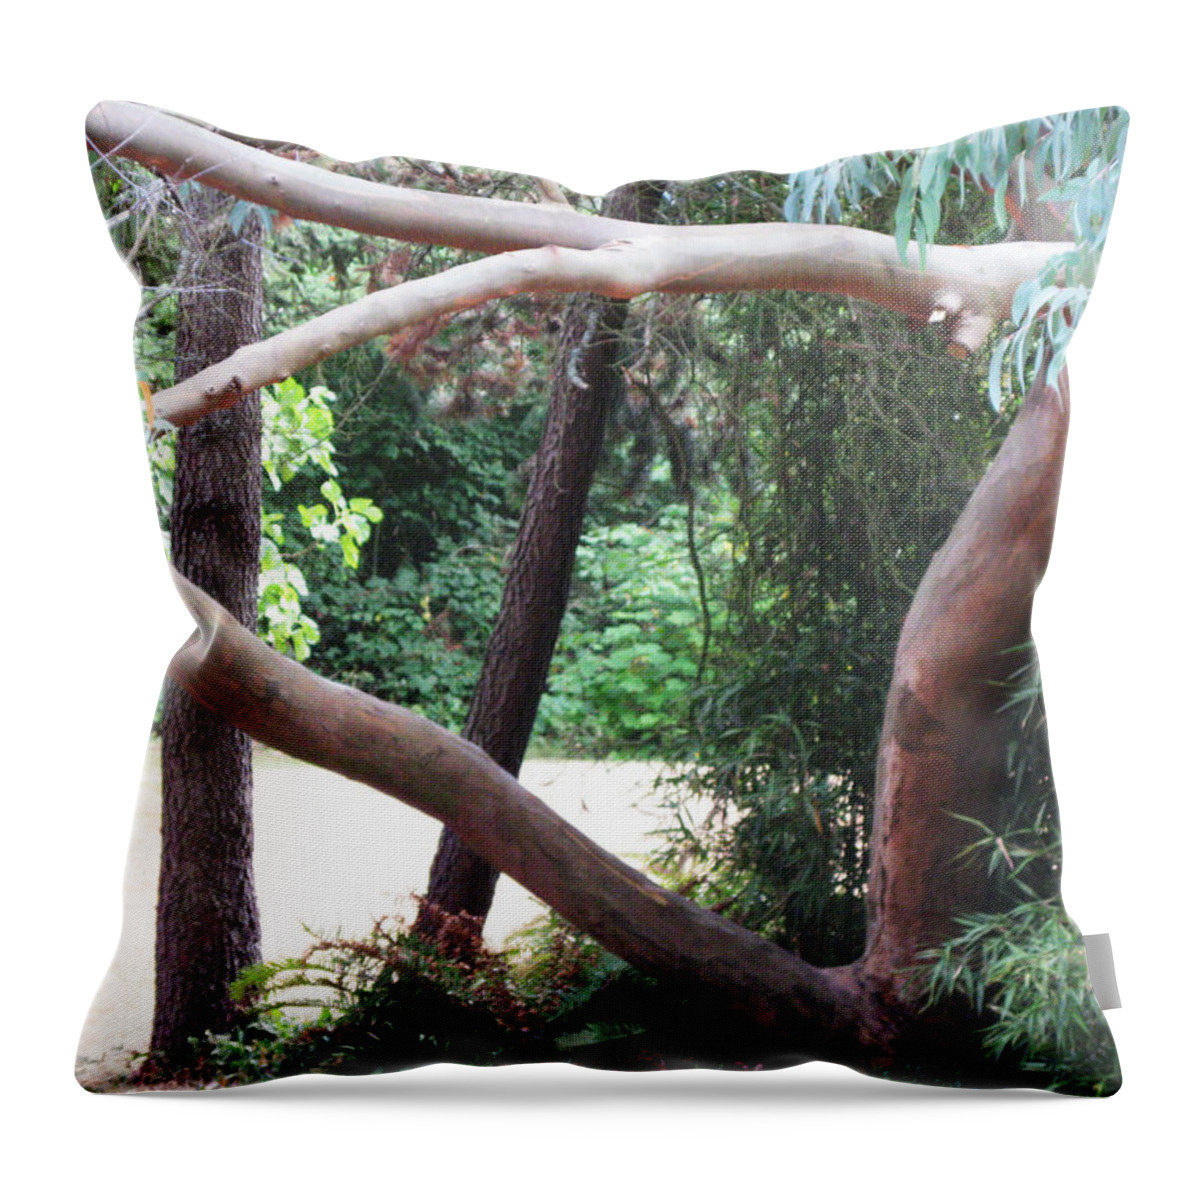 Madrona Throw Pillow featuring the photograph Madrona by David Trotter